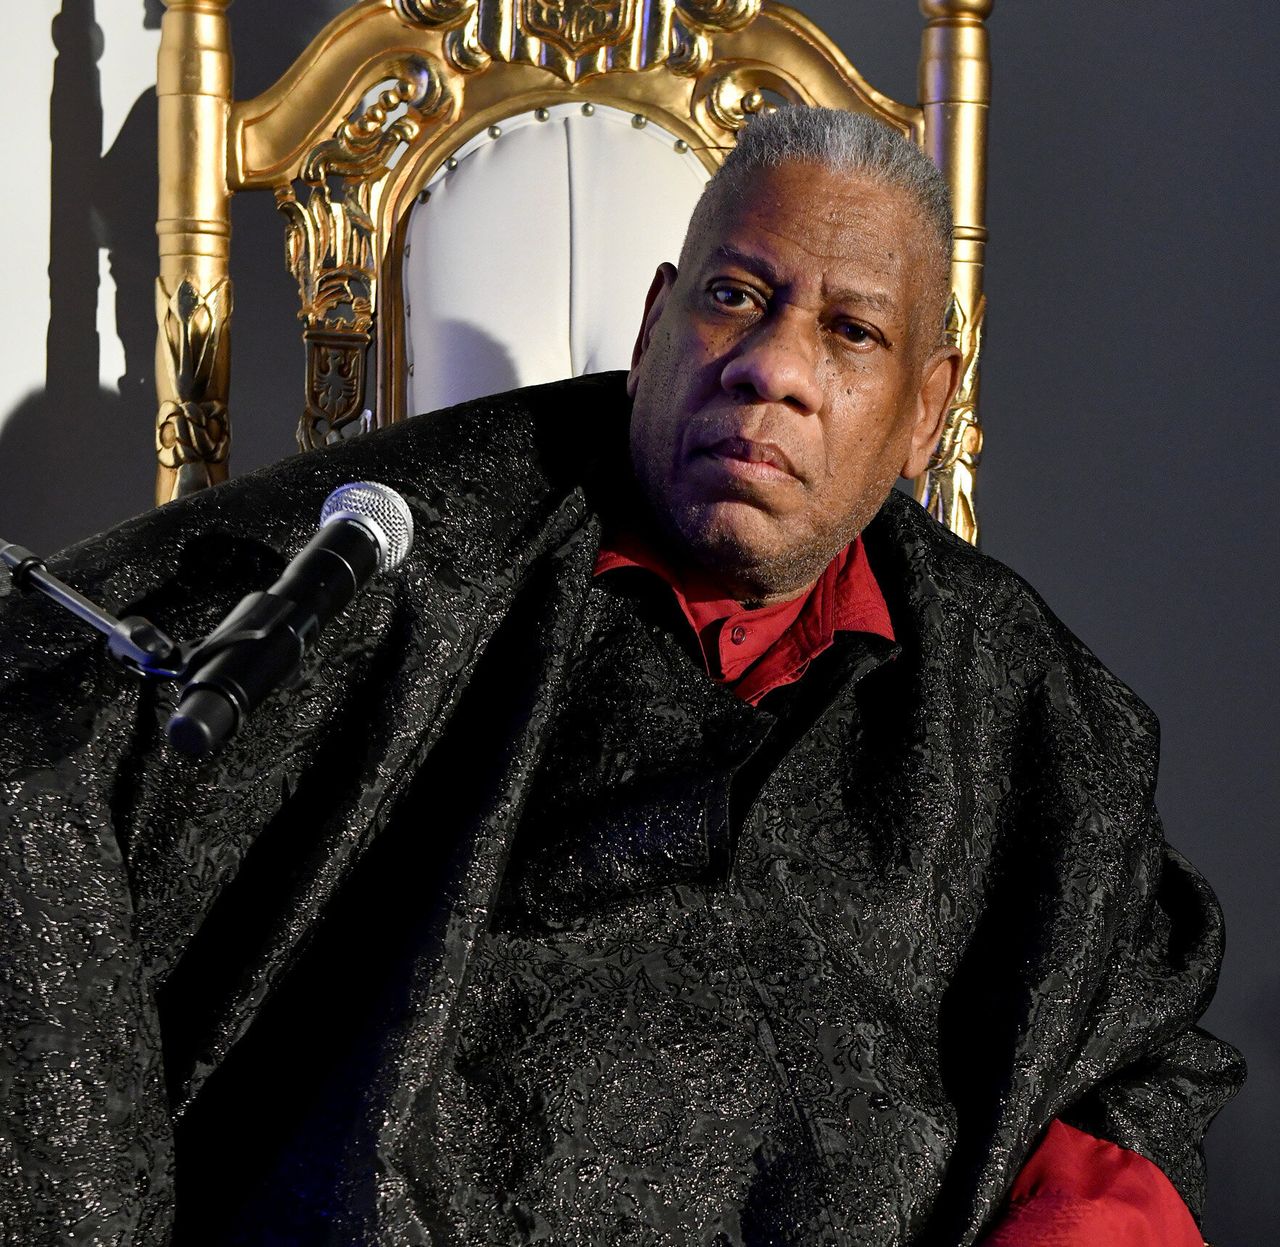 André Leon Talley attends the Blue Jacket Fashion Show to benefit the Prostate Cancer Foundation on Feb. 5, 2020, in New York City.